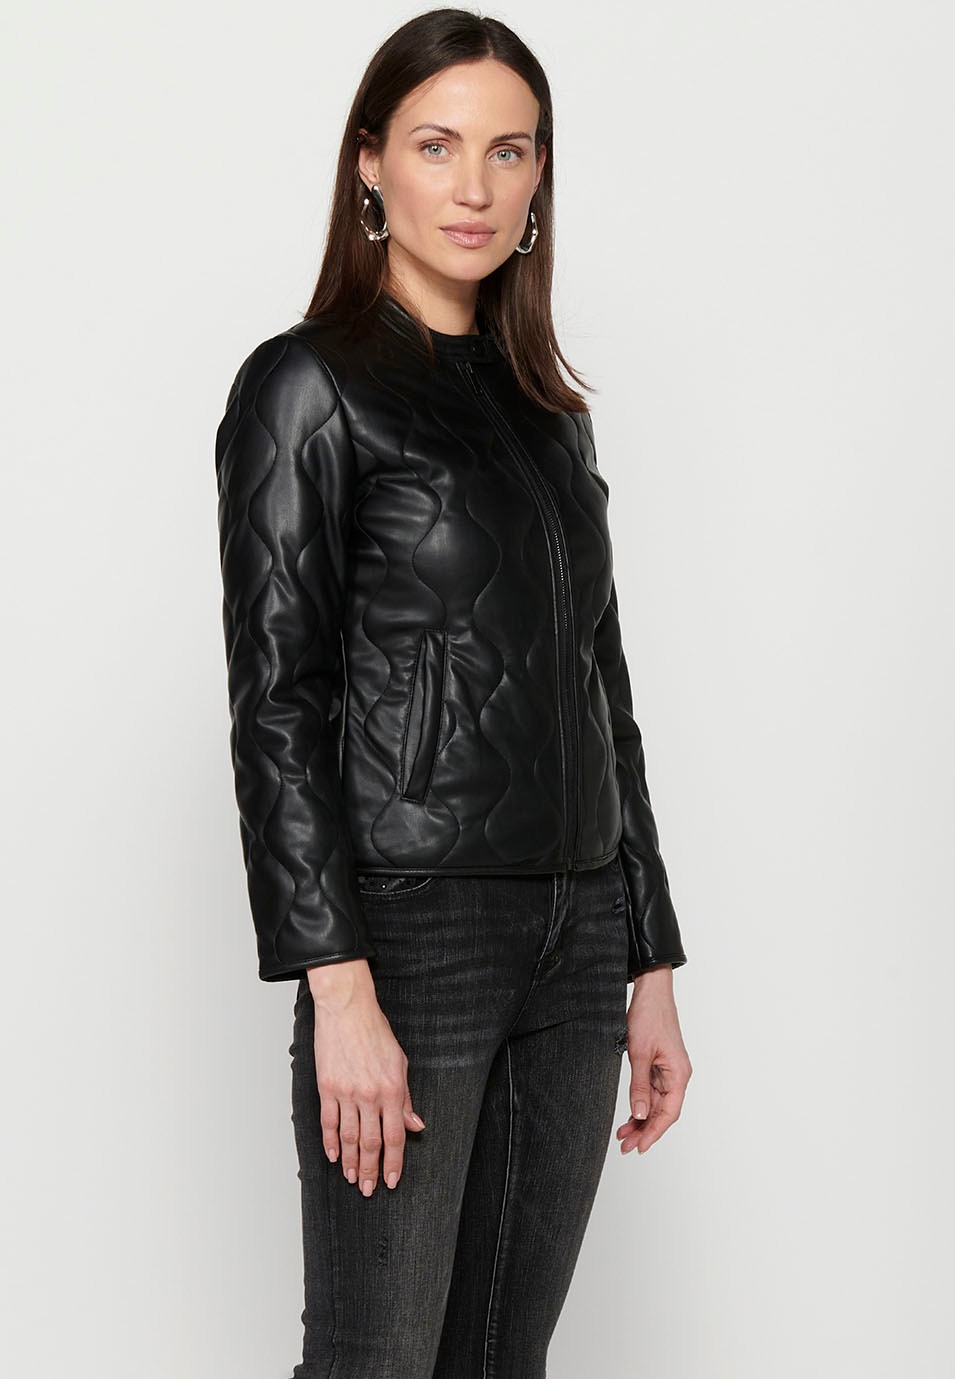 Quilted long sleeve jacket. Round neck. Black color for women